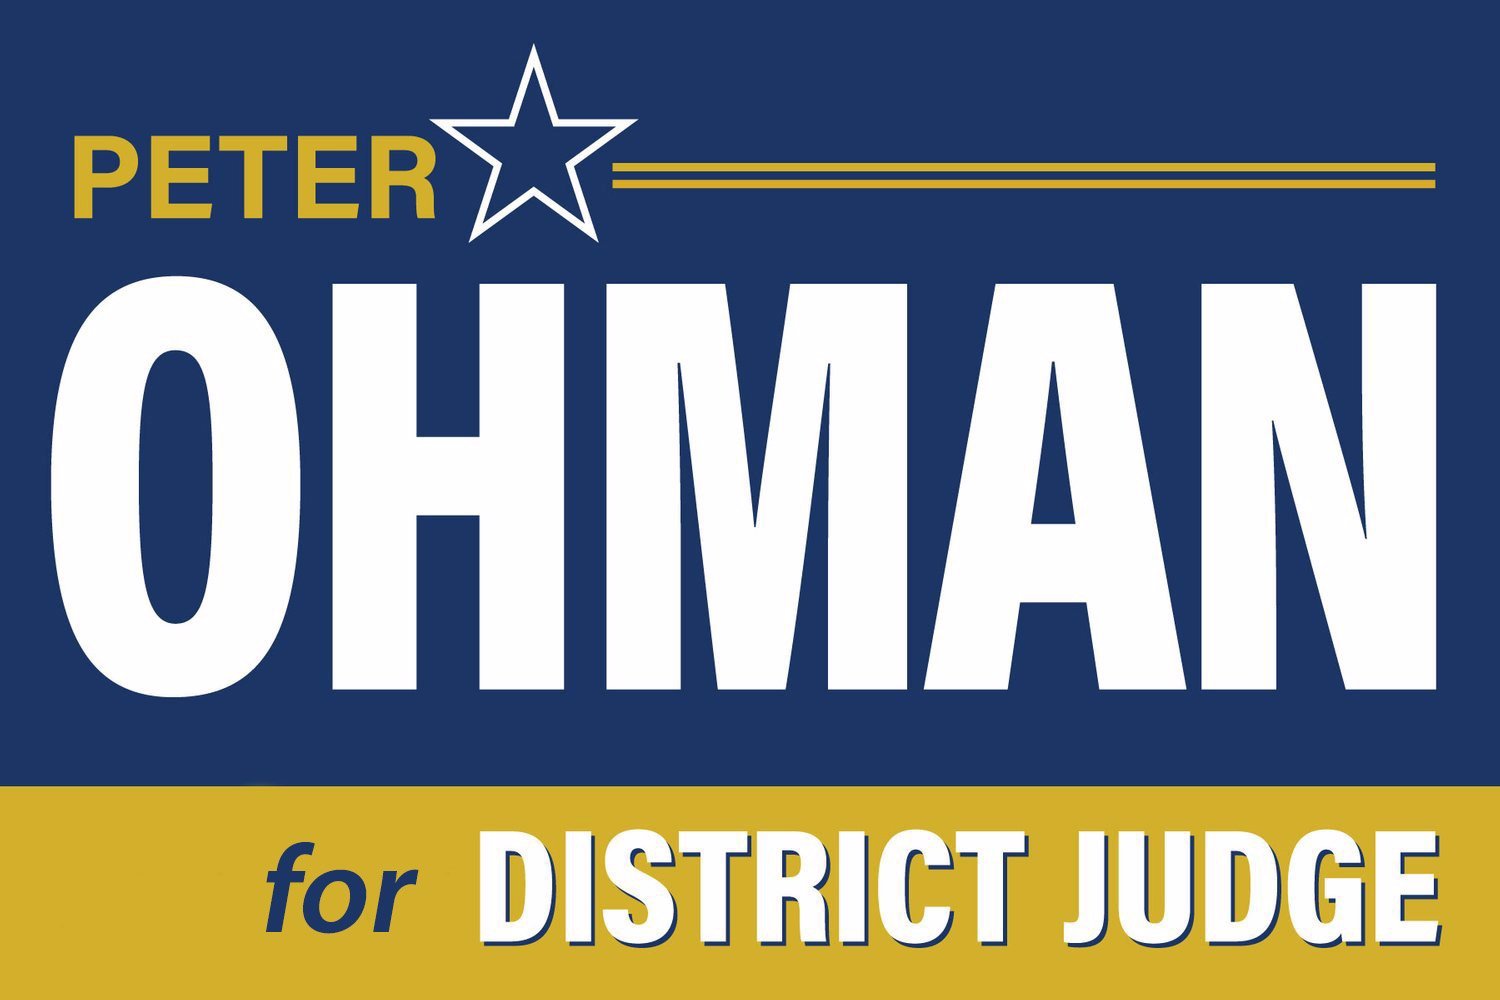 Re-elect Judge Peter Ohman